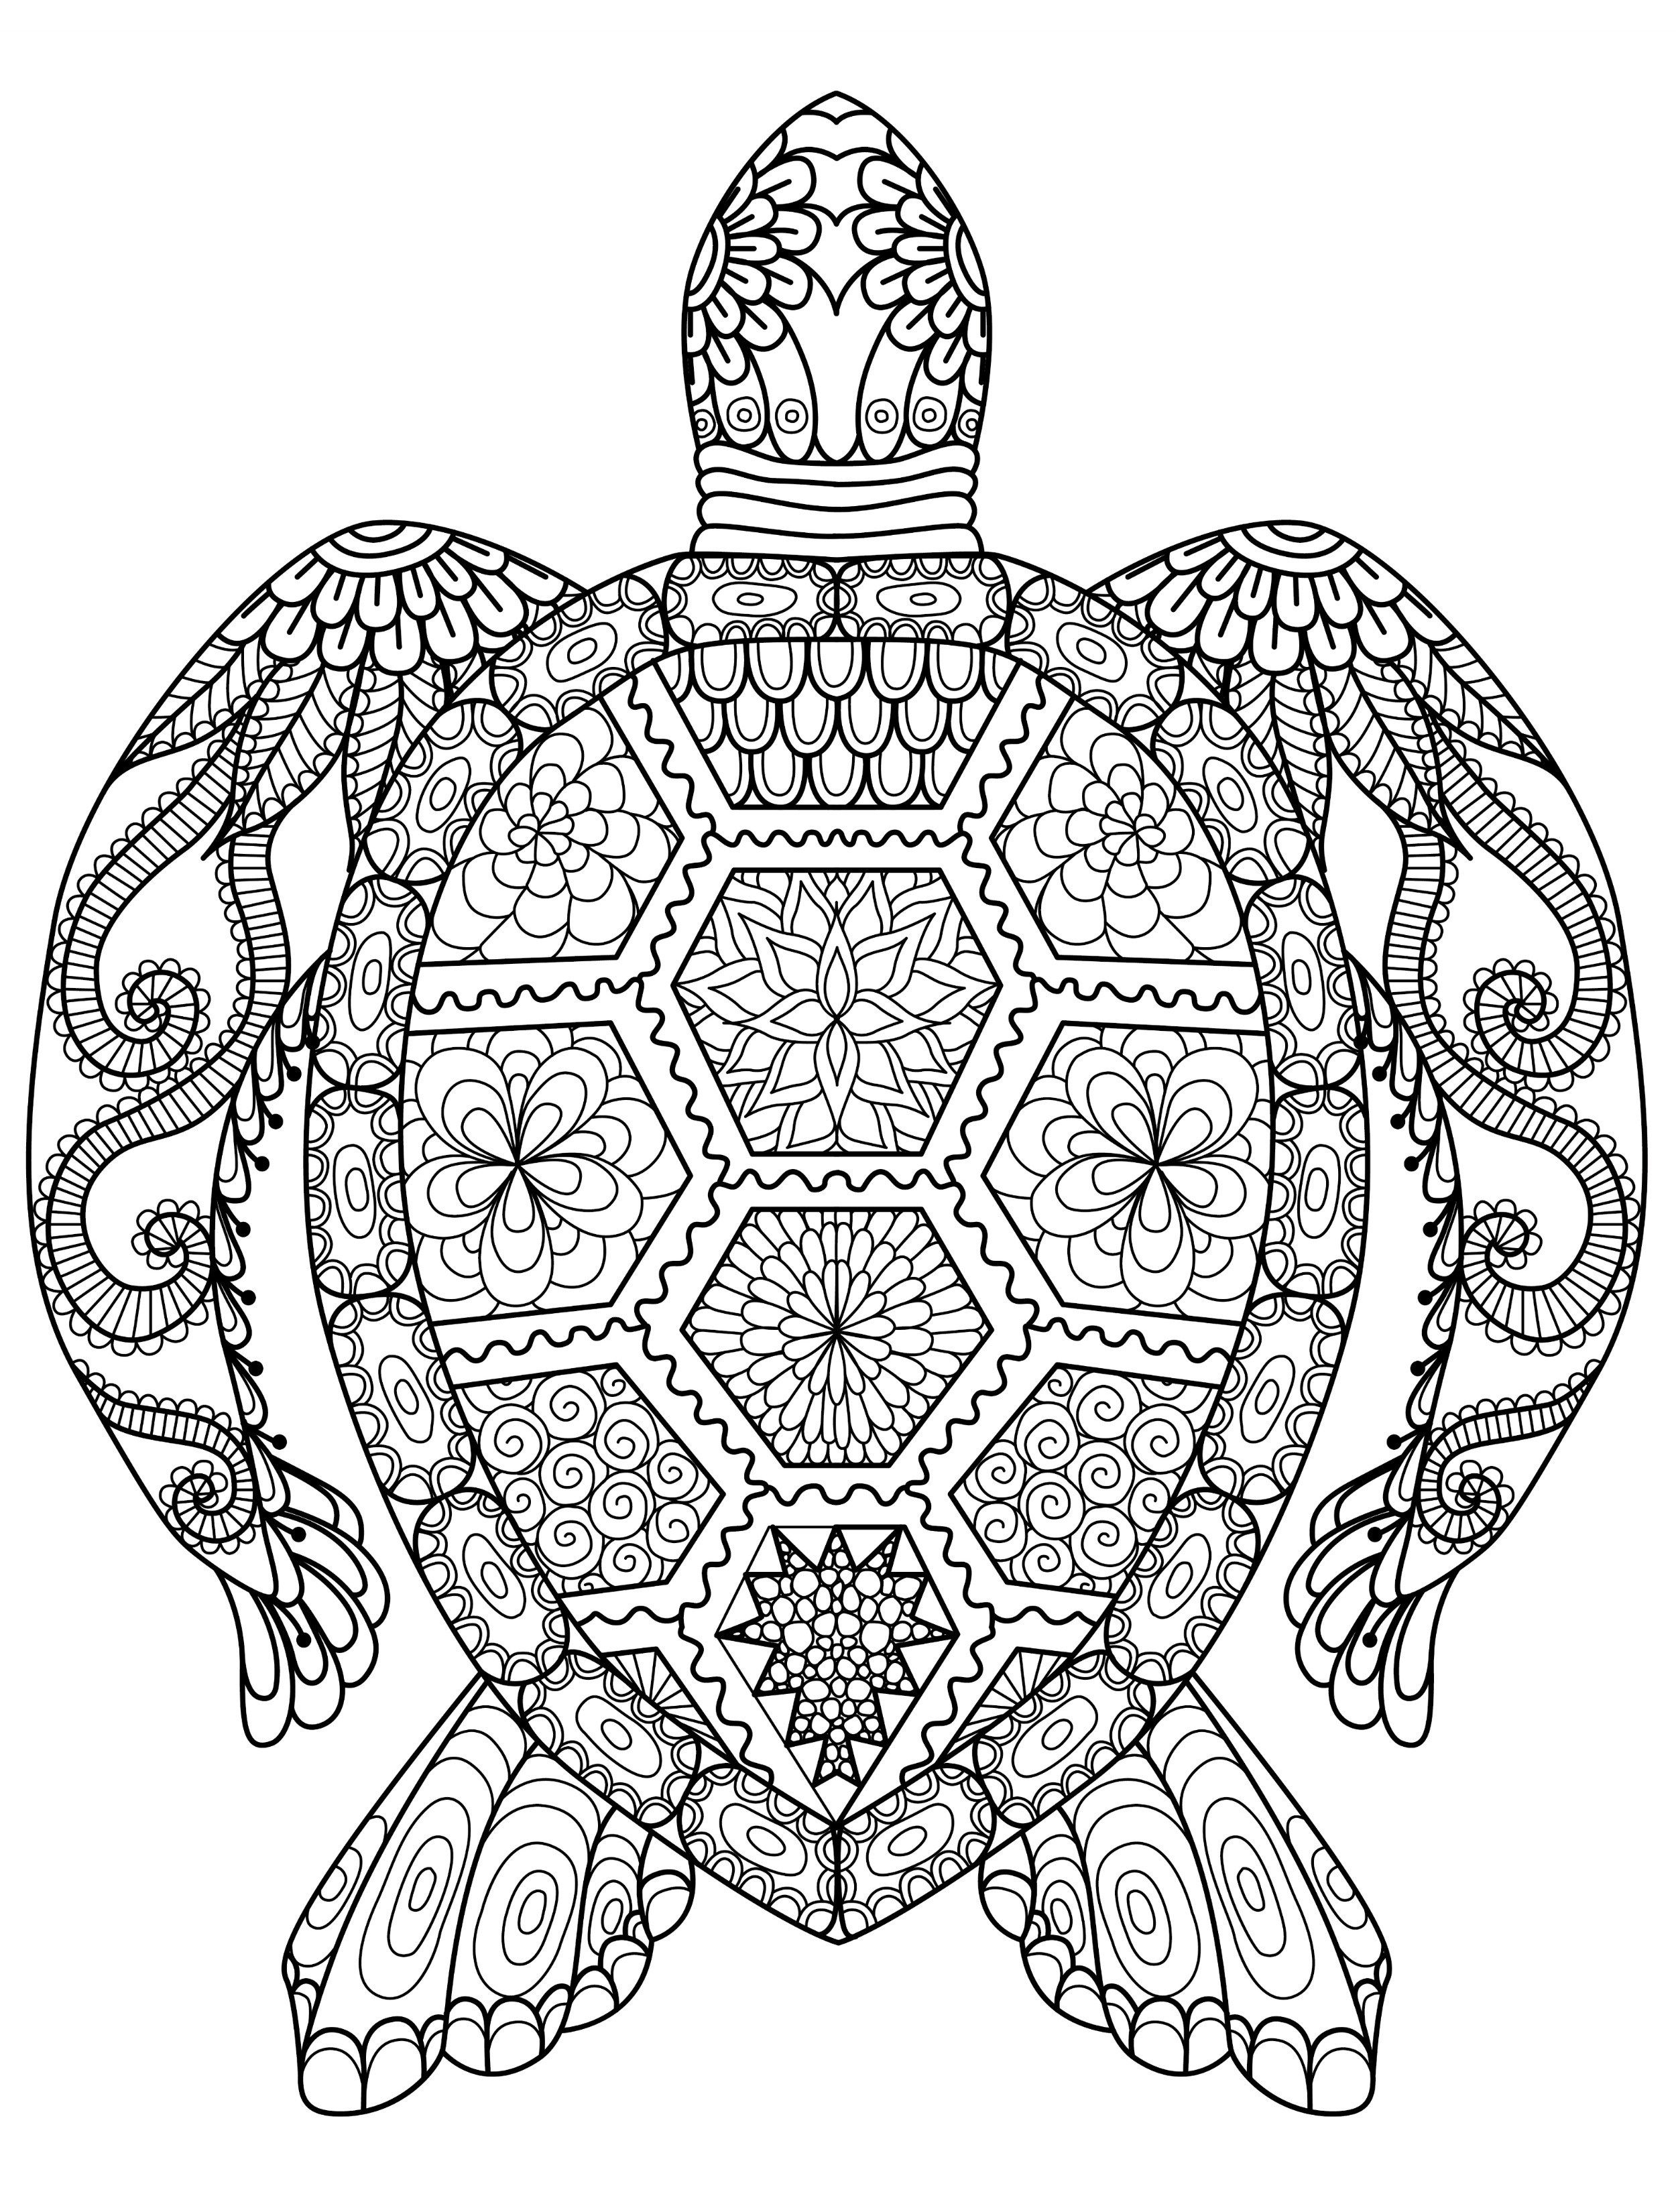 20 Gorgeous Free Printable Adult Coloring Pages … | Adult Coloring - Free Printable Coloring Pages For Adults